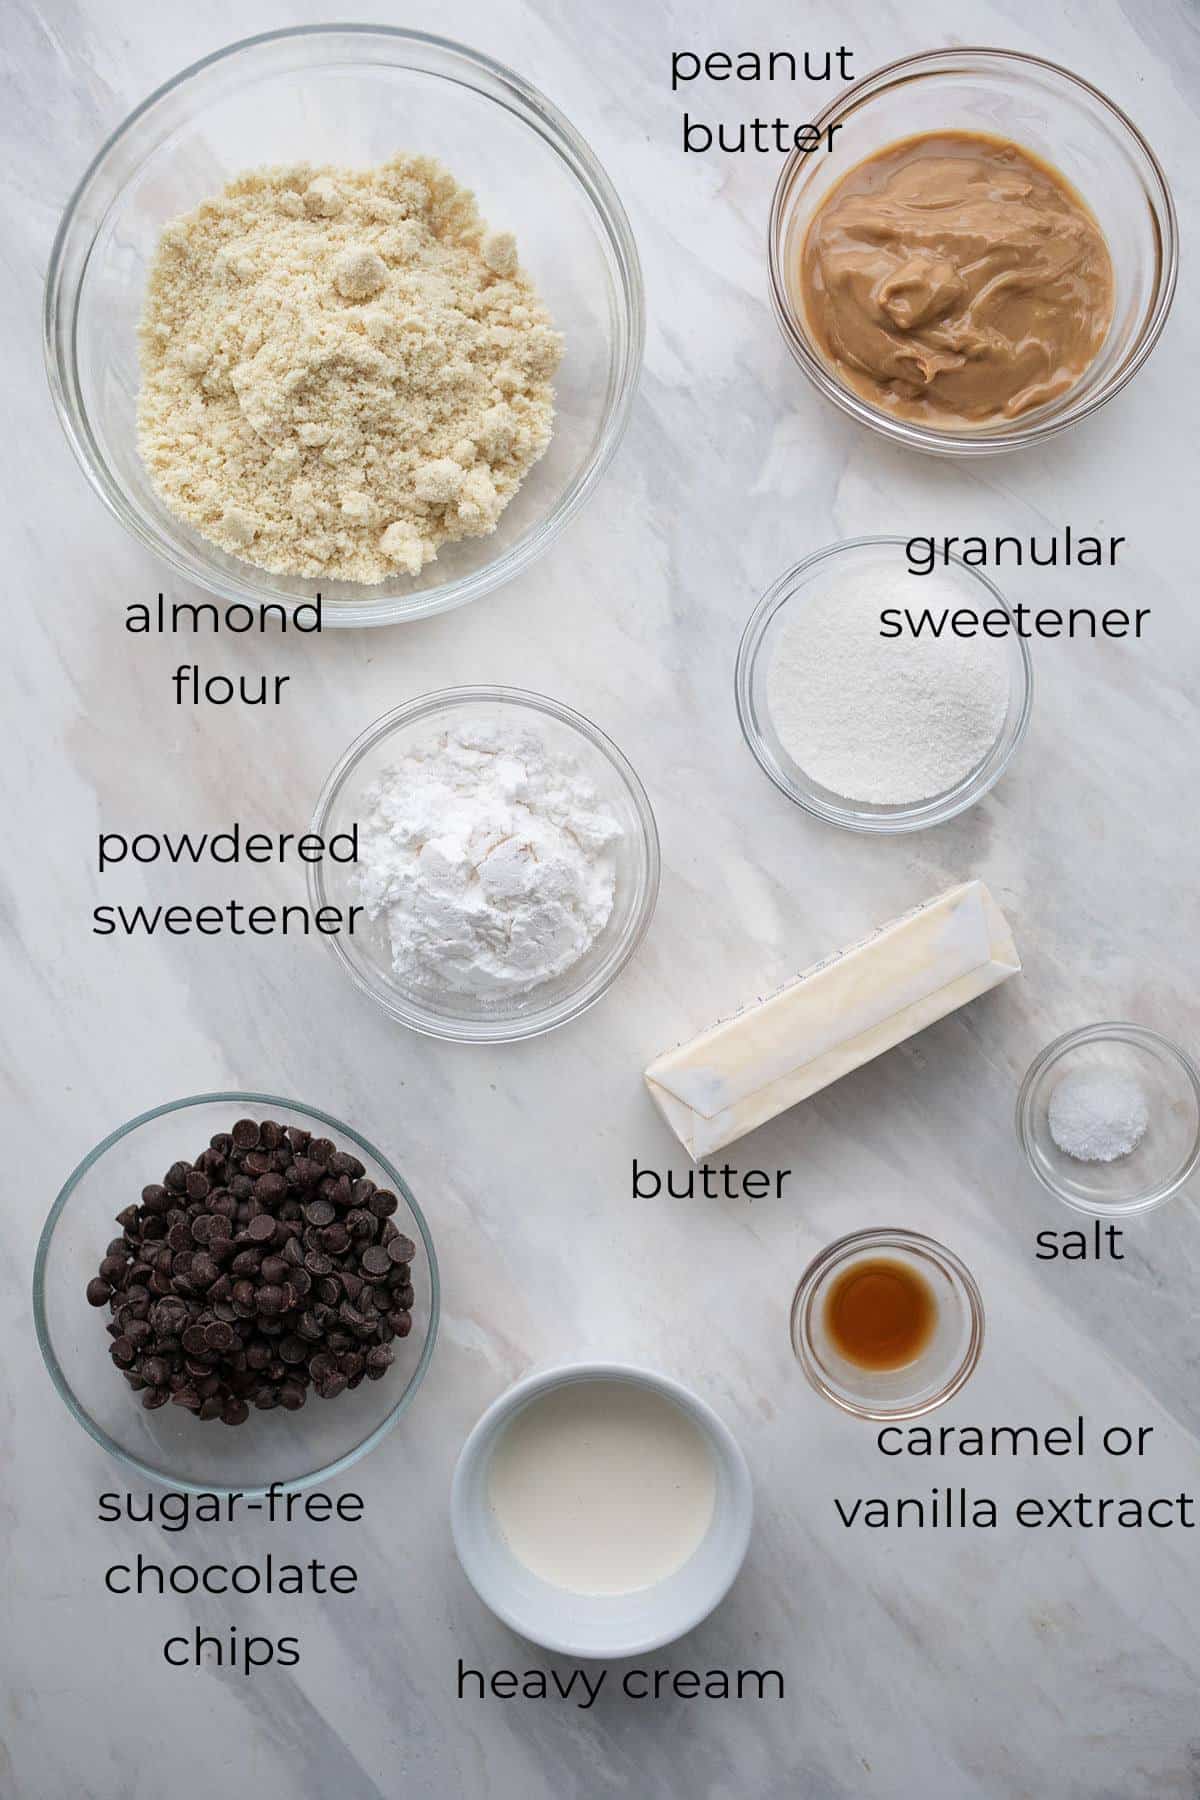 Top down image of ingredients needed for tagalong bars.